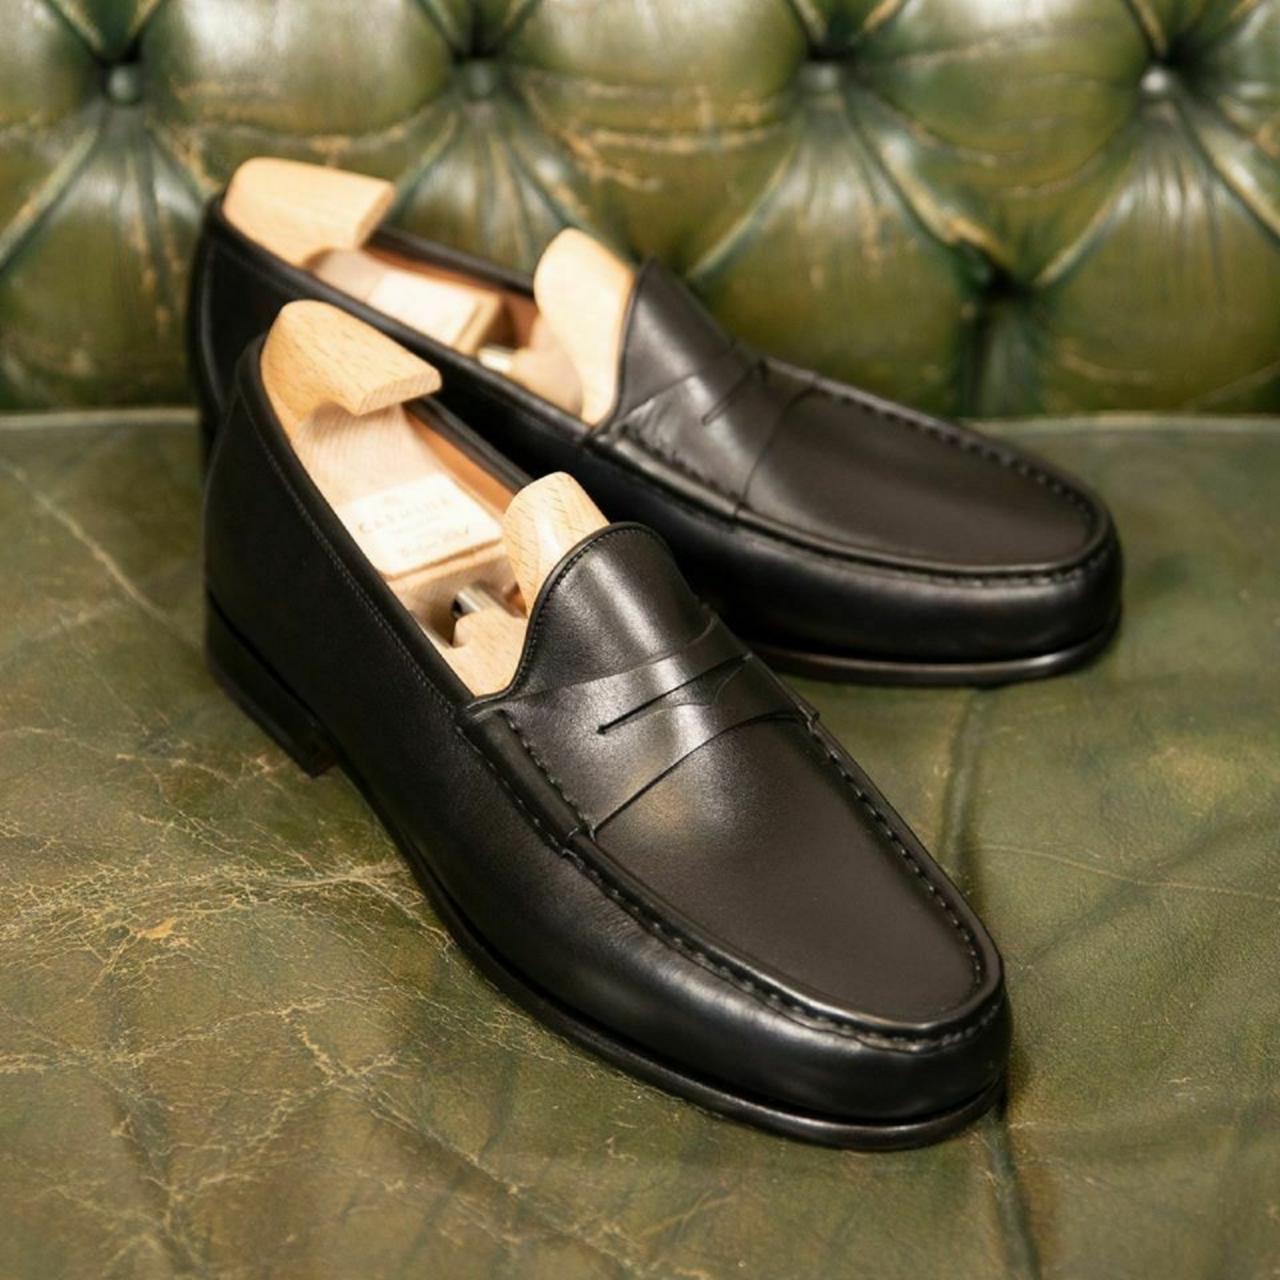 Essential Men's Penny Loafers Handstitched Real Leather Apron Toe Slip On Shoes